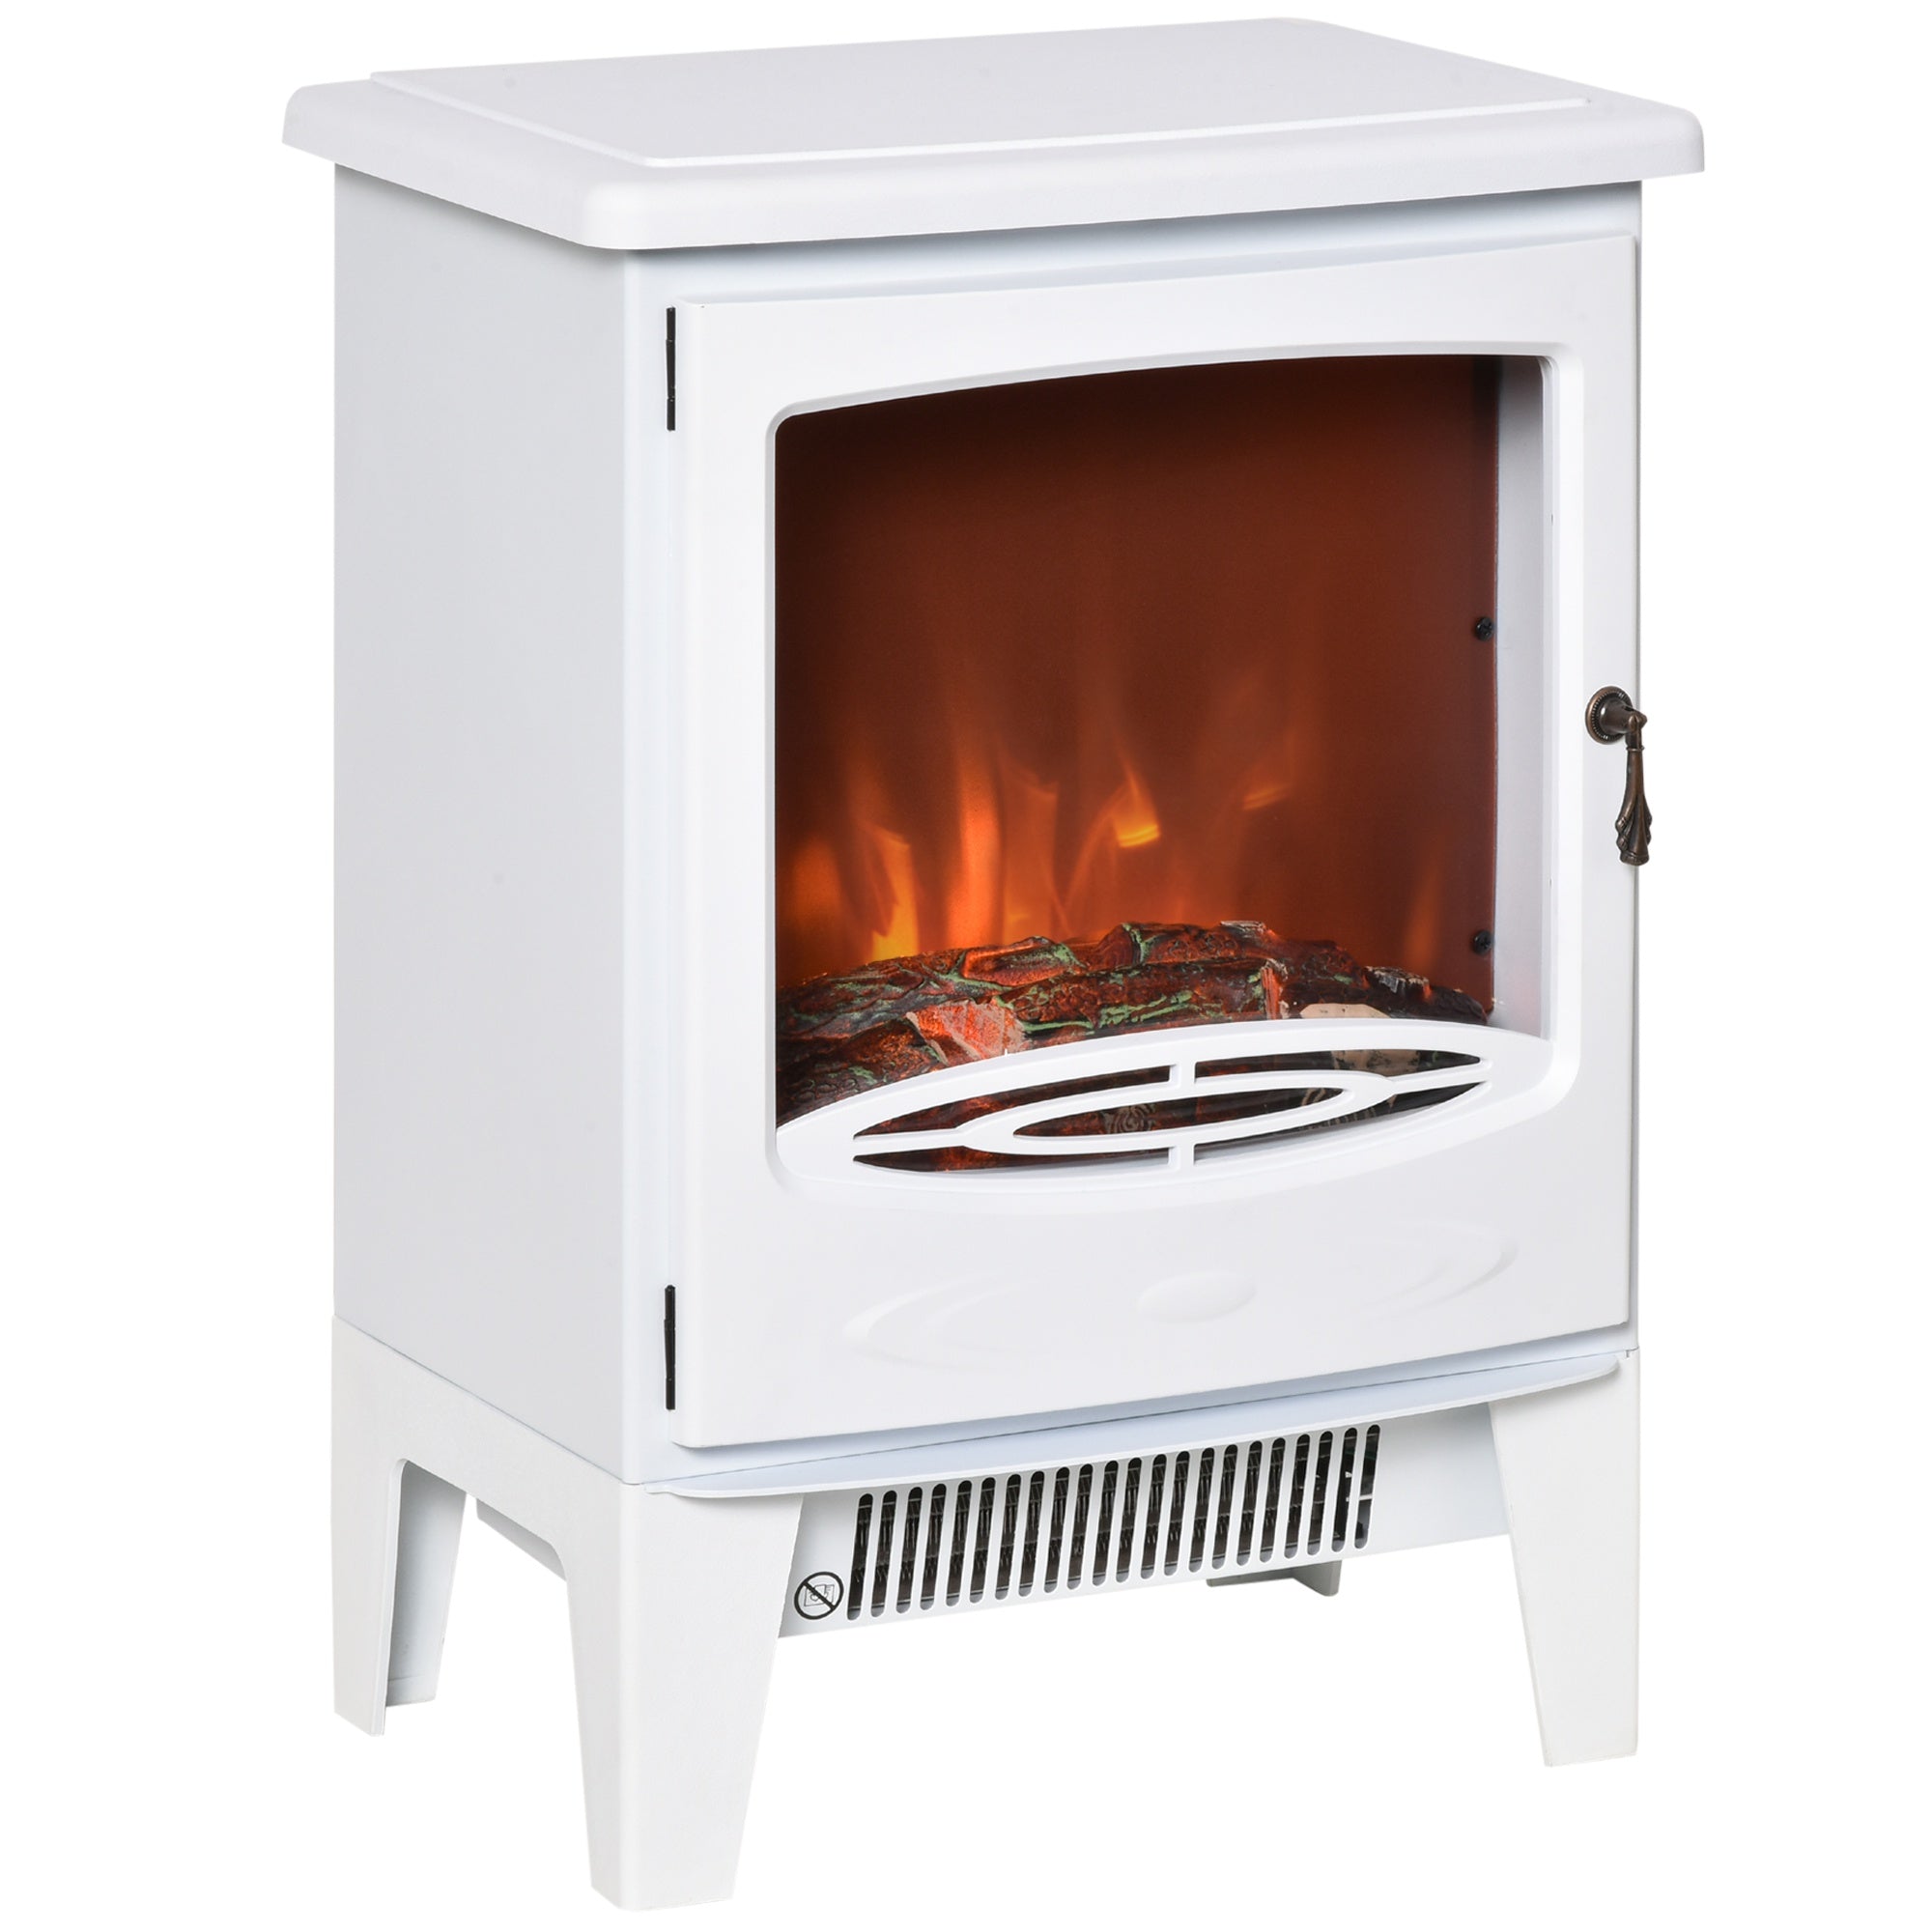 HOMCOM Freestanding Electric Fireplace Stove Heater W/ LED Flame Effect White  | TJ Hughes